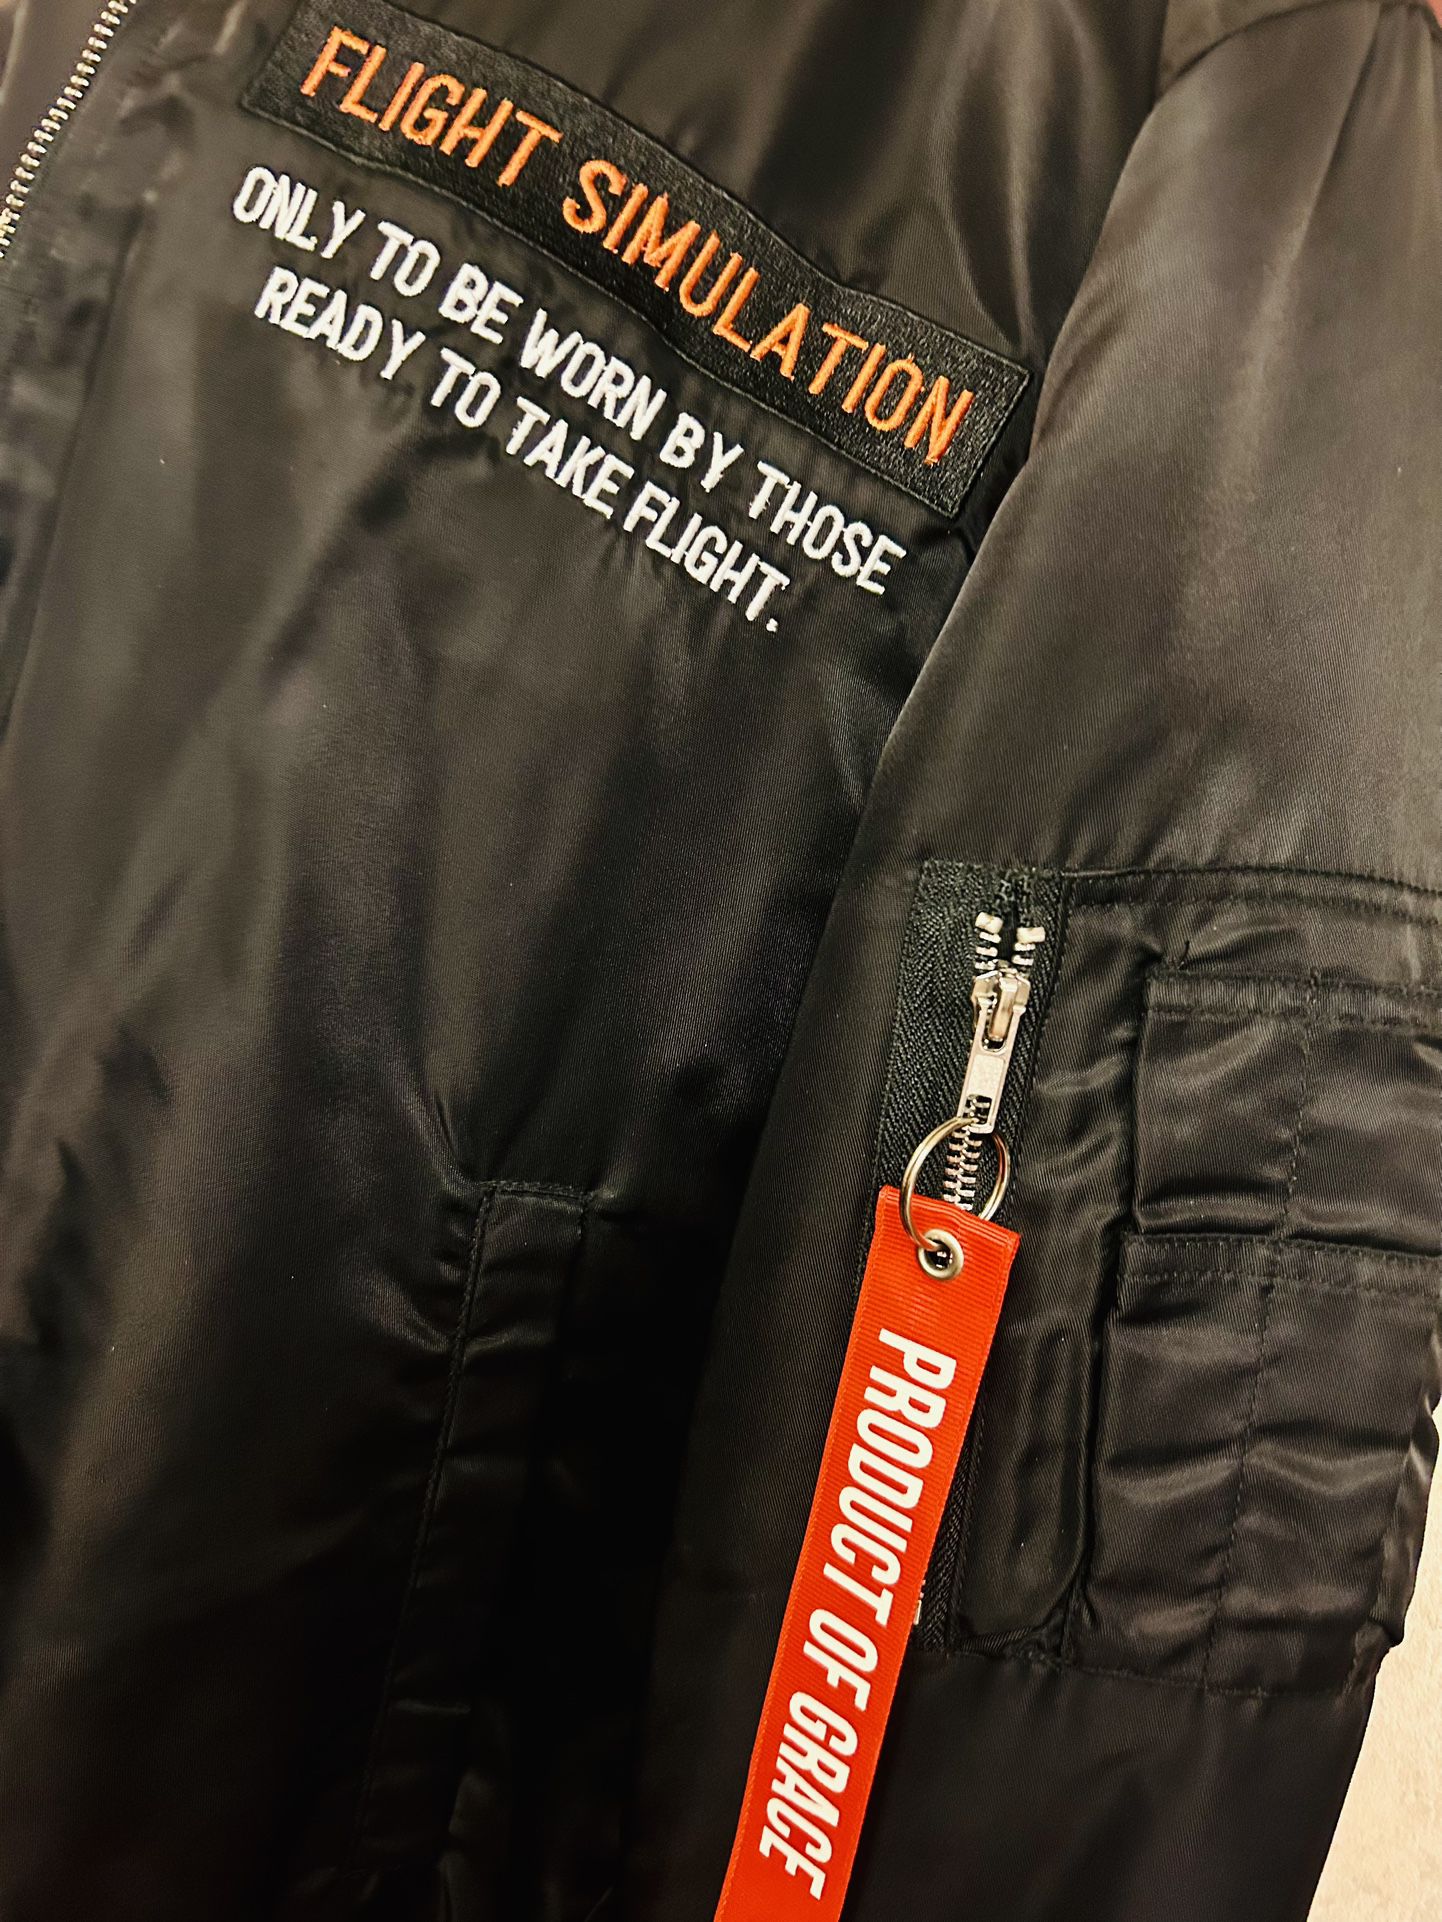 AOH Limited Edition Bomber Jacket - Great Gift! Medium - SALE